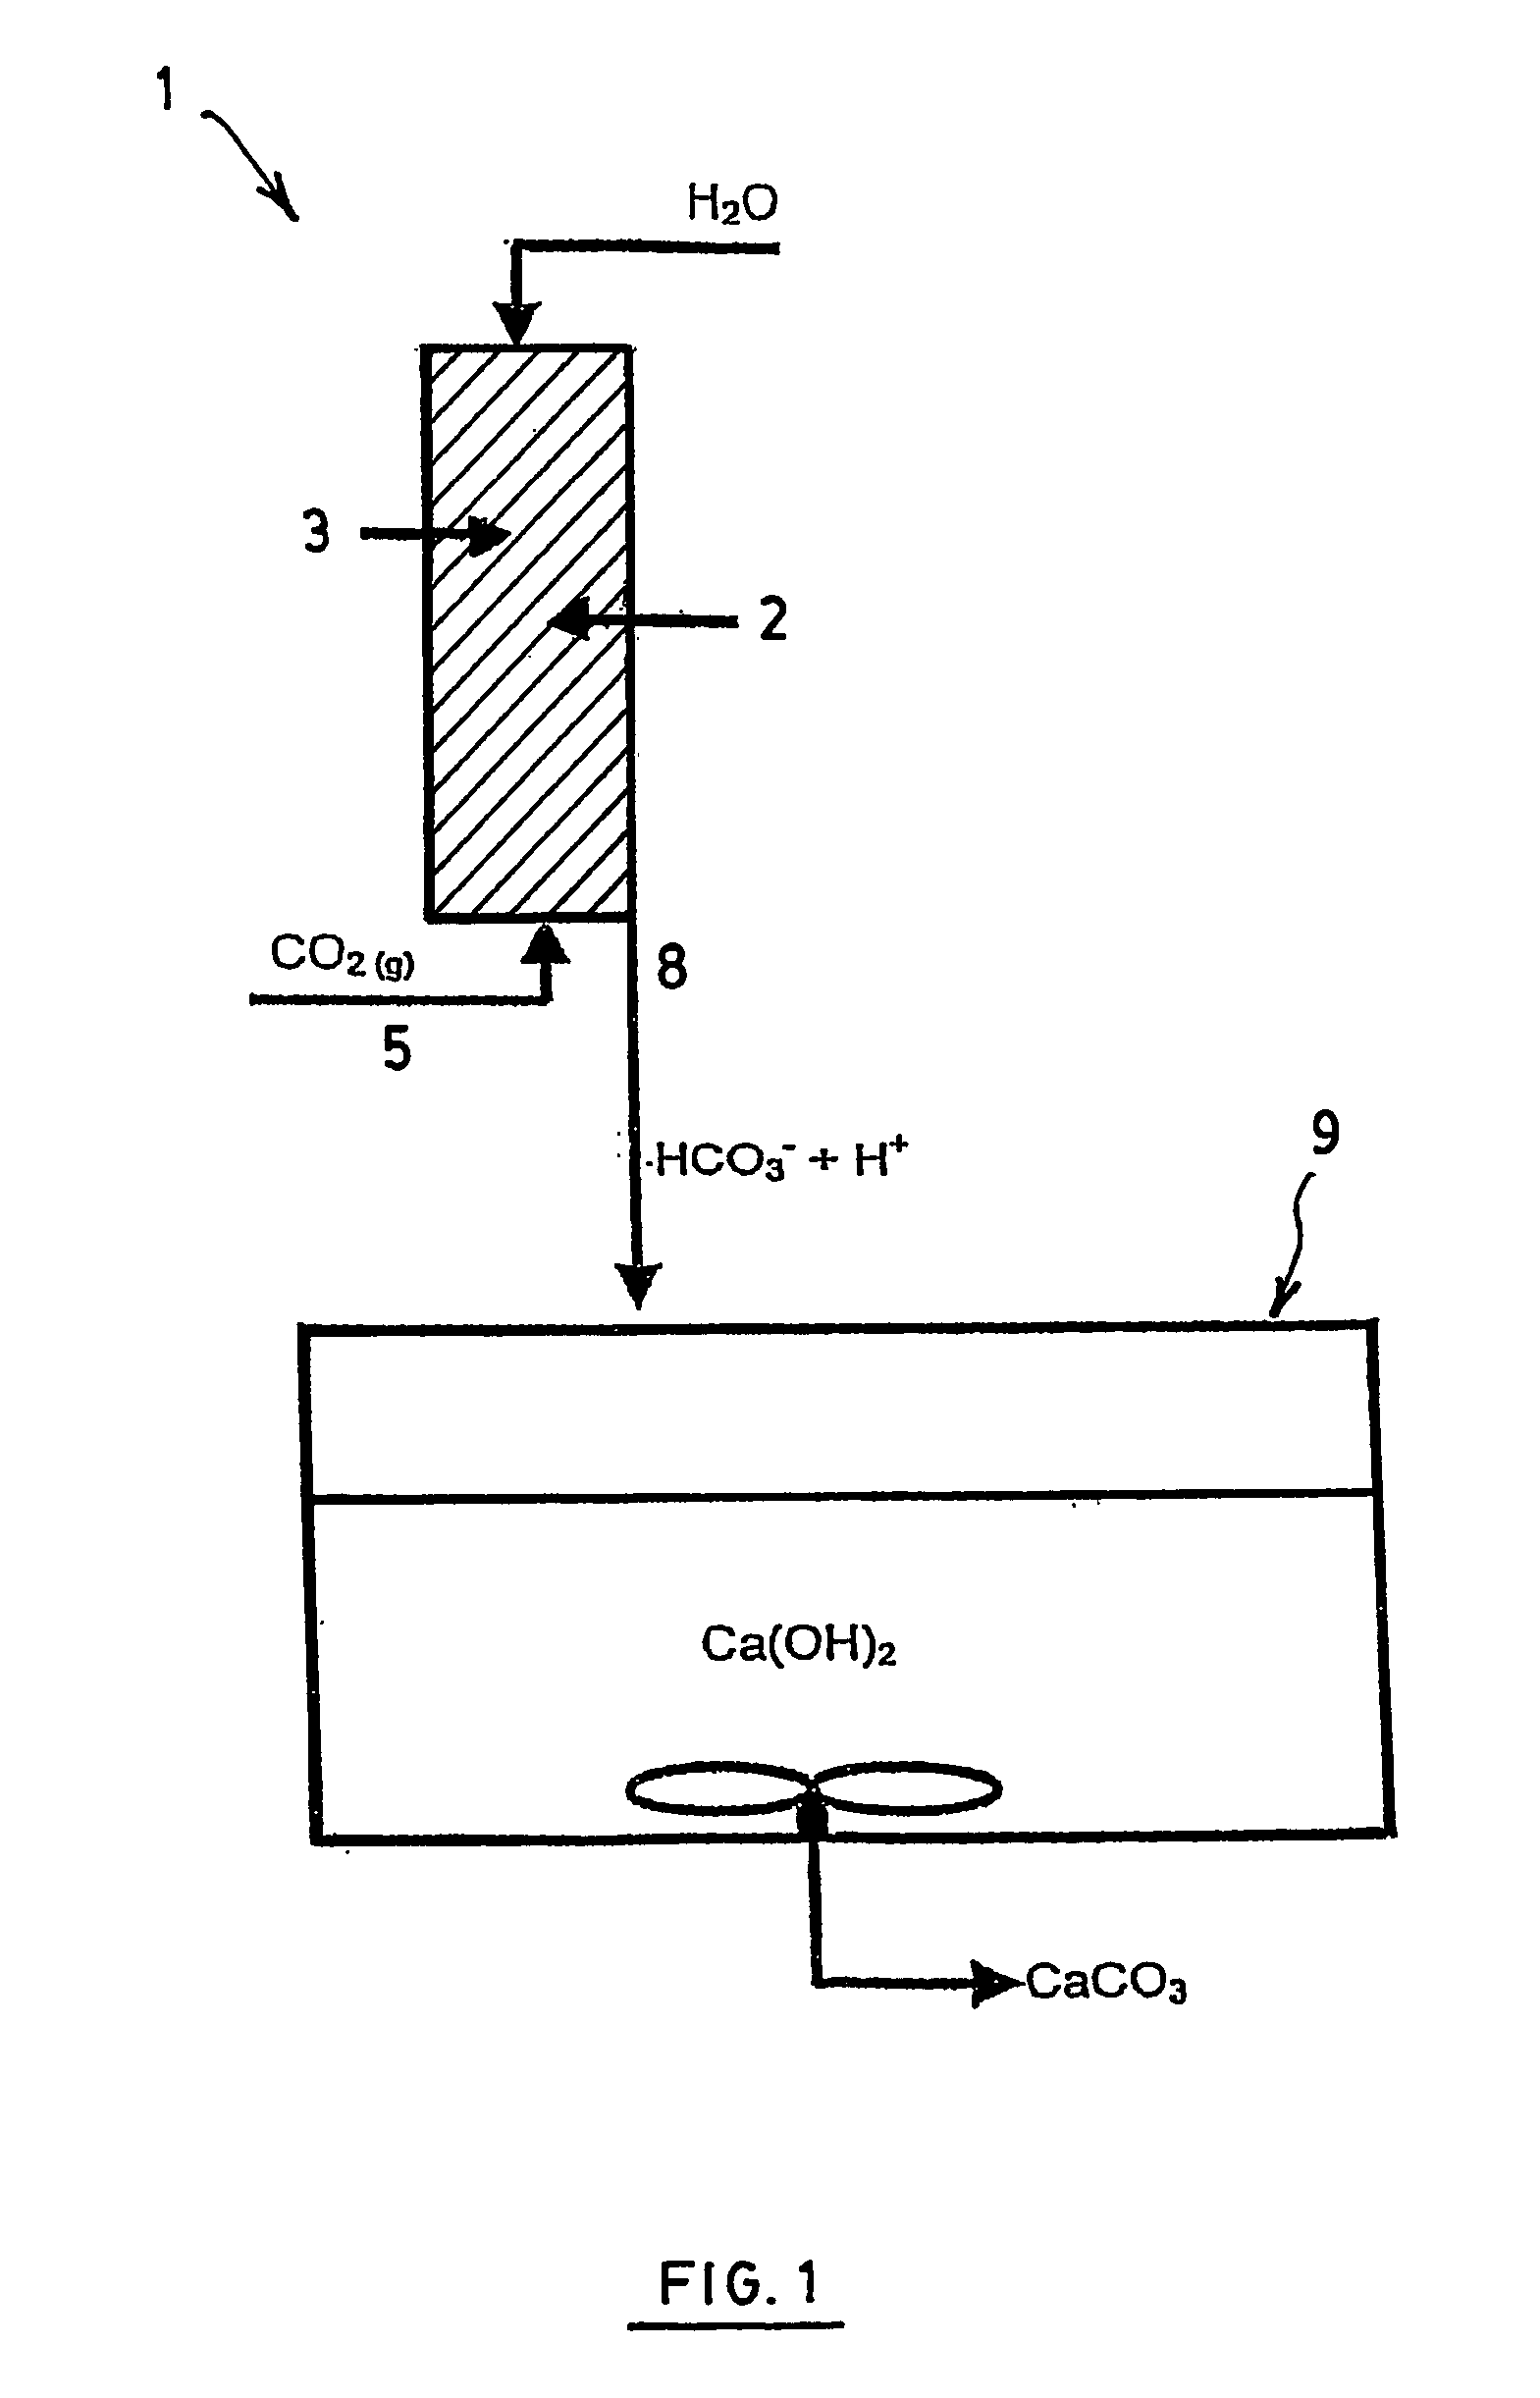 Process and an apparatus for producing calcium carbonate via an enzymatic pathway